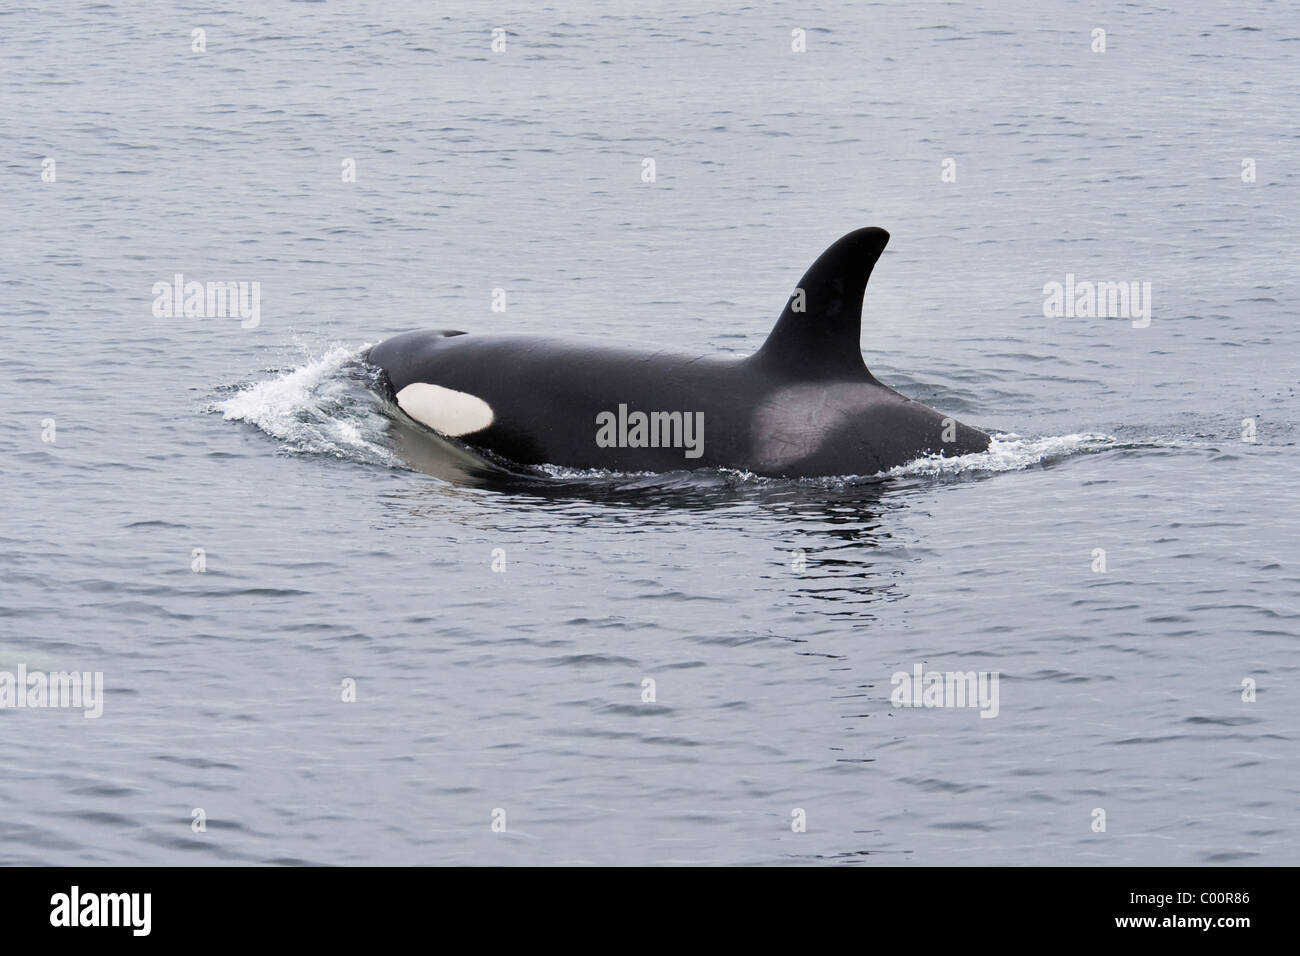 Killer Whale/Orca (Orcinus orca) probably sub-adult Male surfacing. Monterey, California, Pacific Ocean. Stock Photo